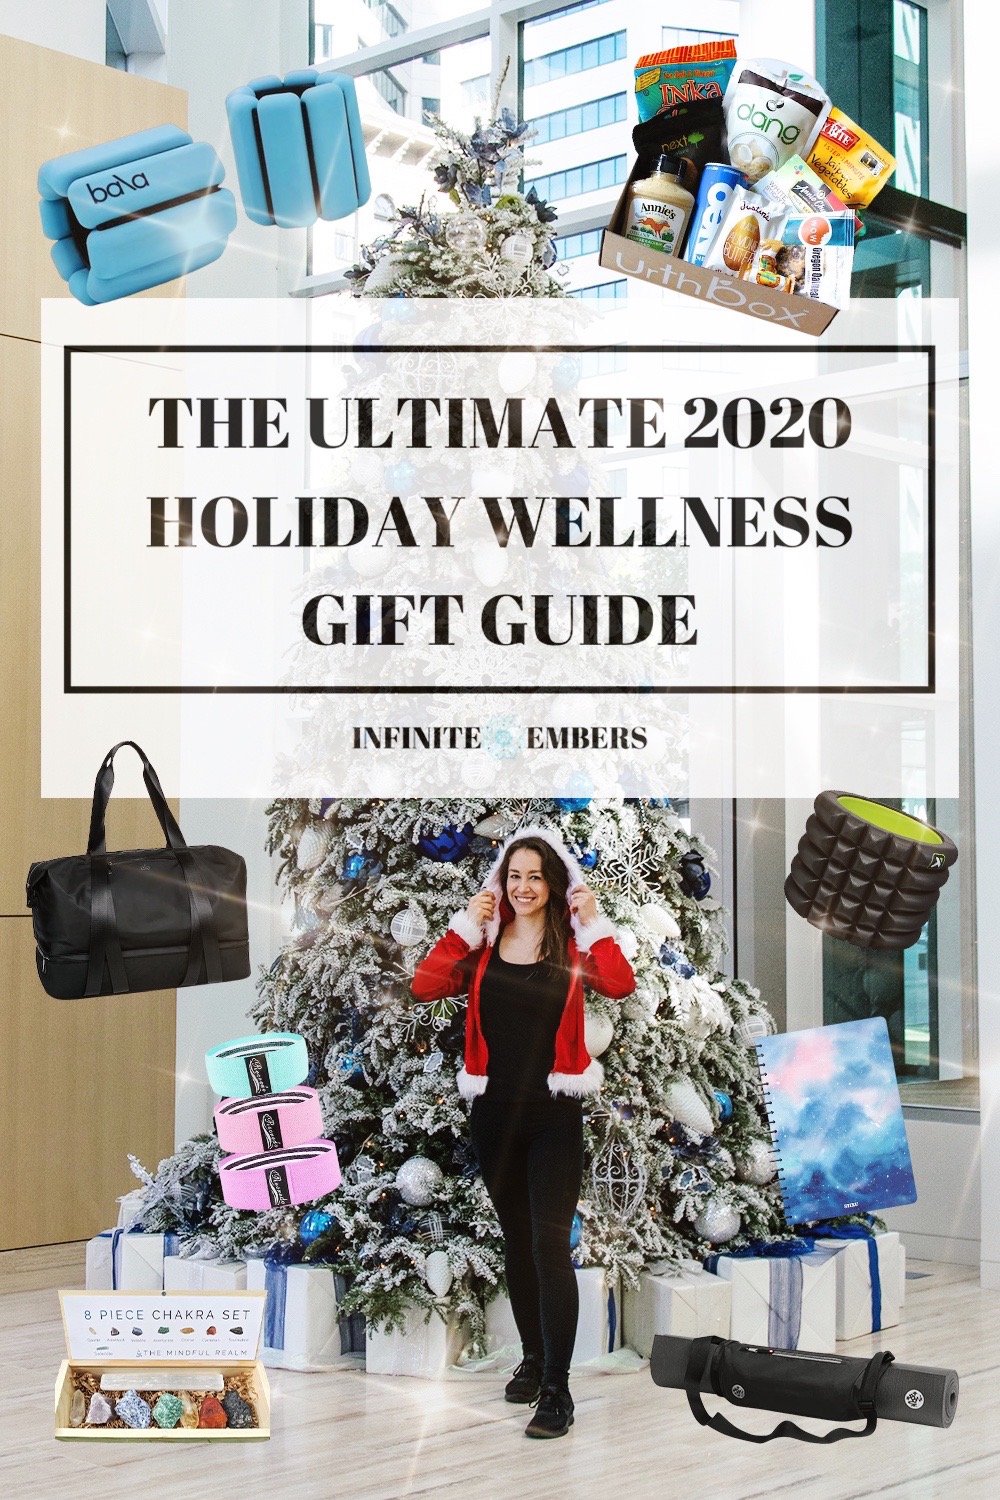 2021 holiday gift wellness enthusiasts